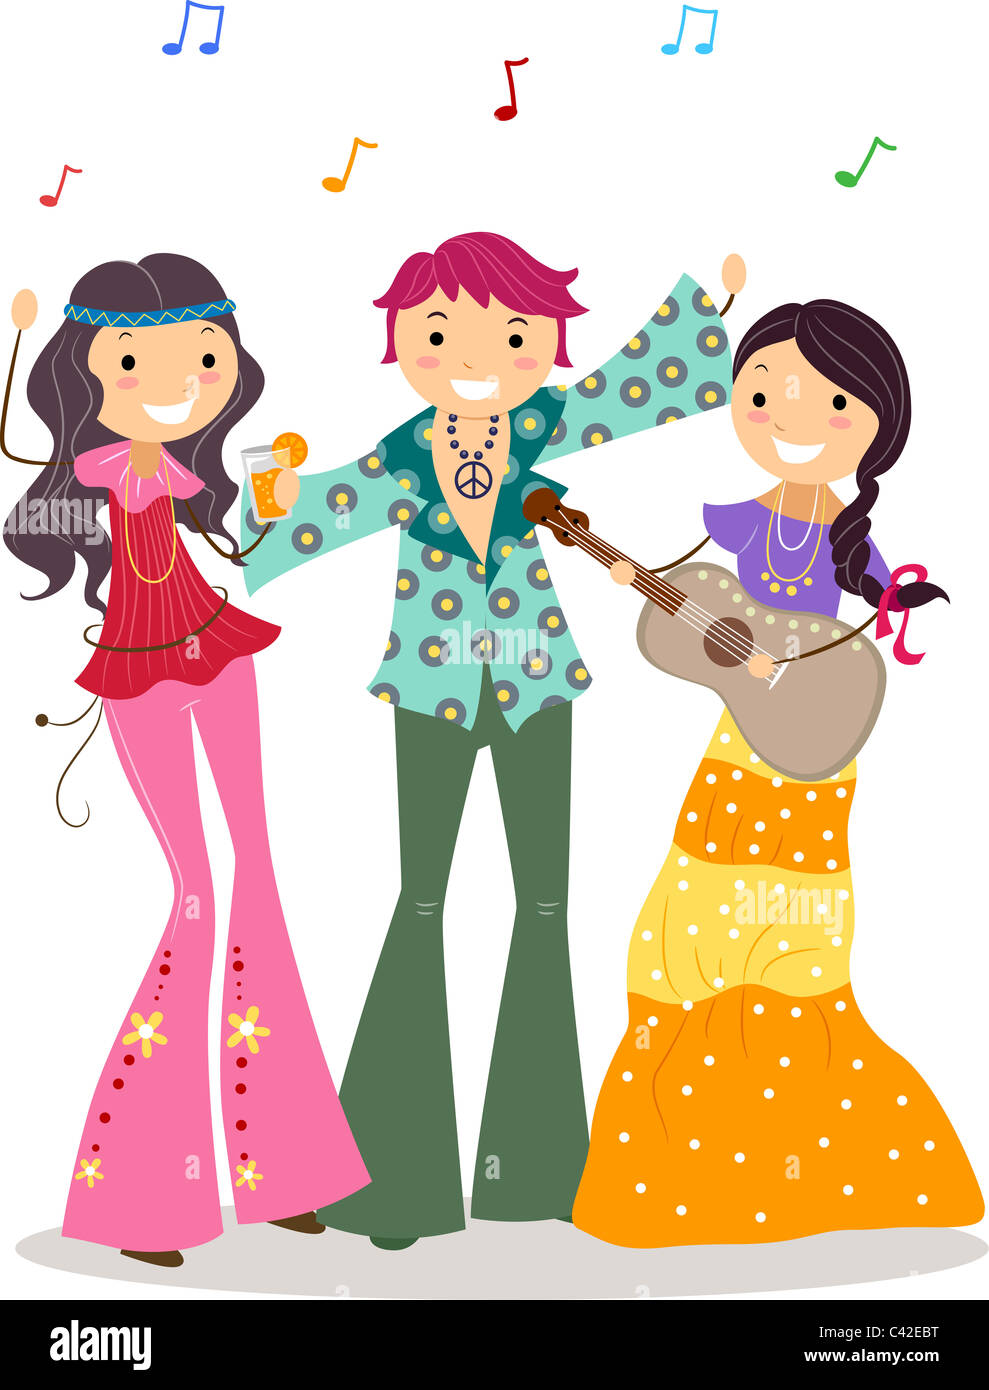 Illustration of a Party with a Hippie Theme Stock Photo